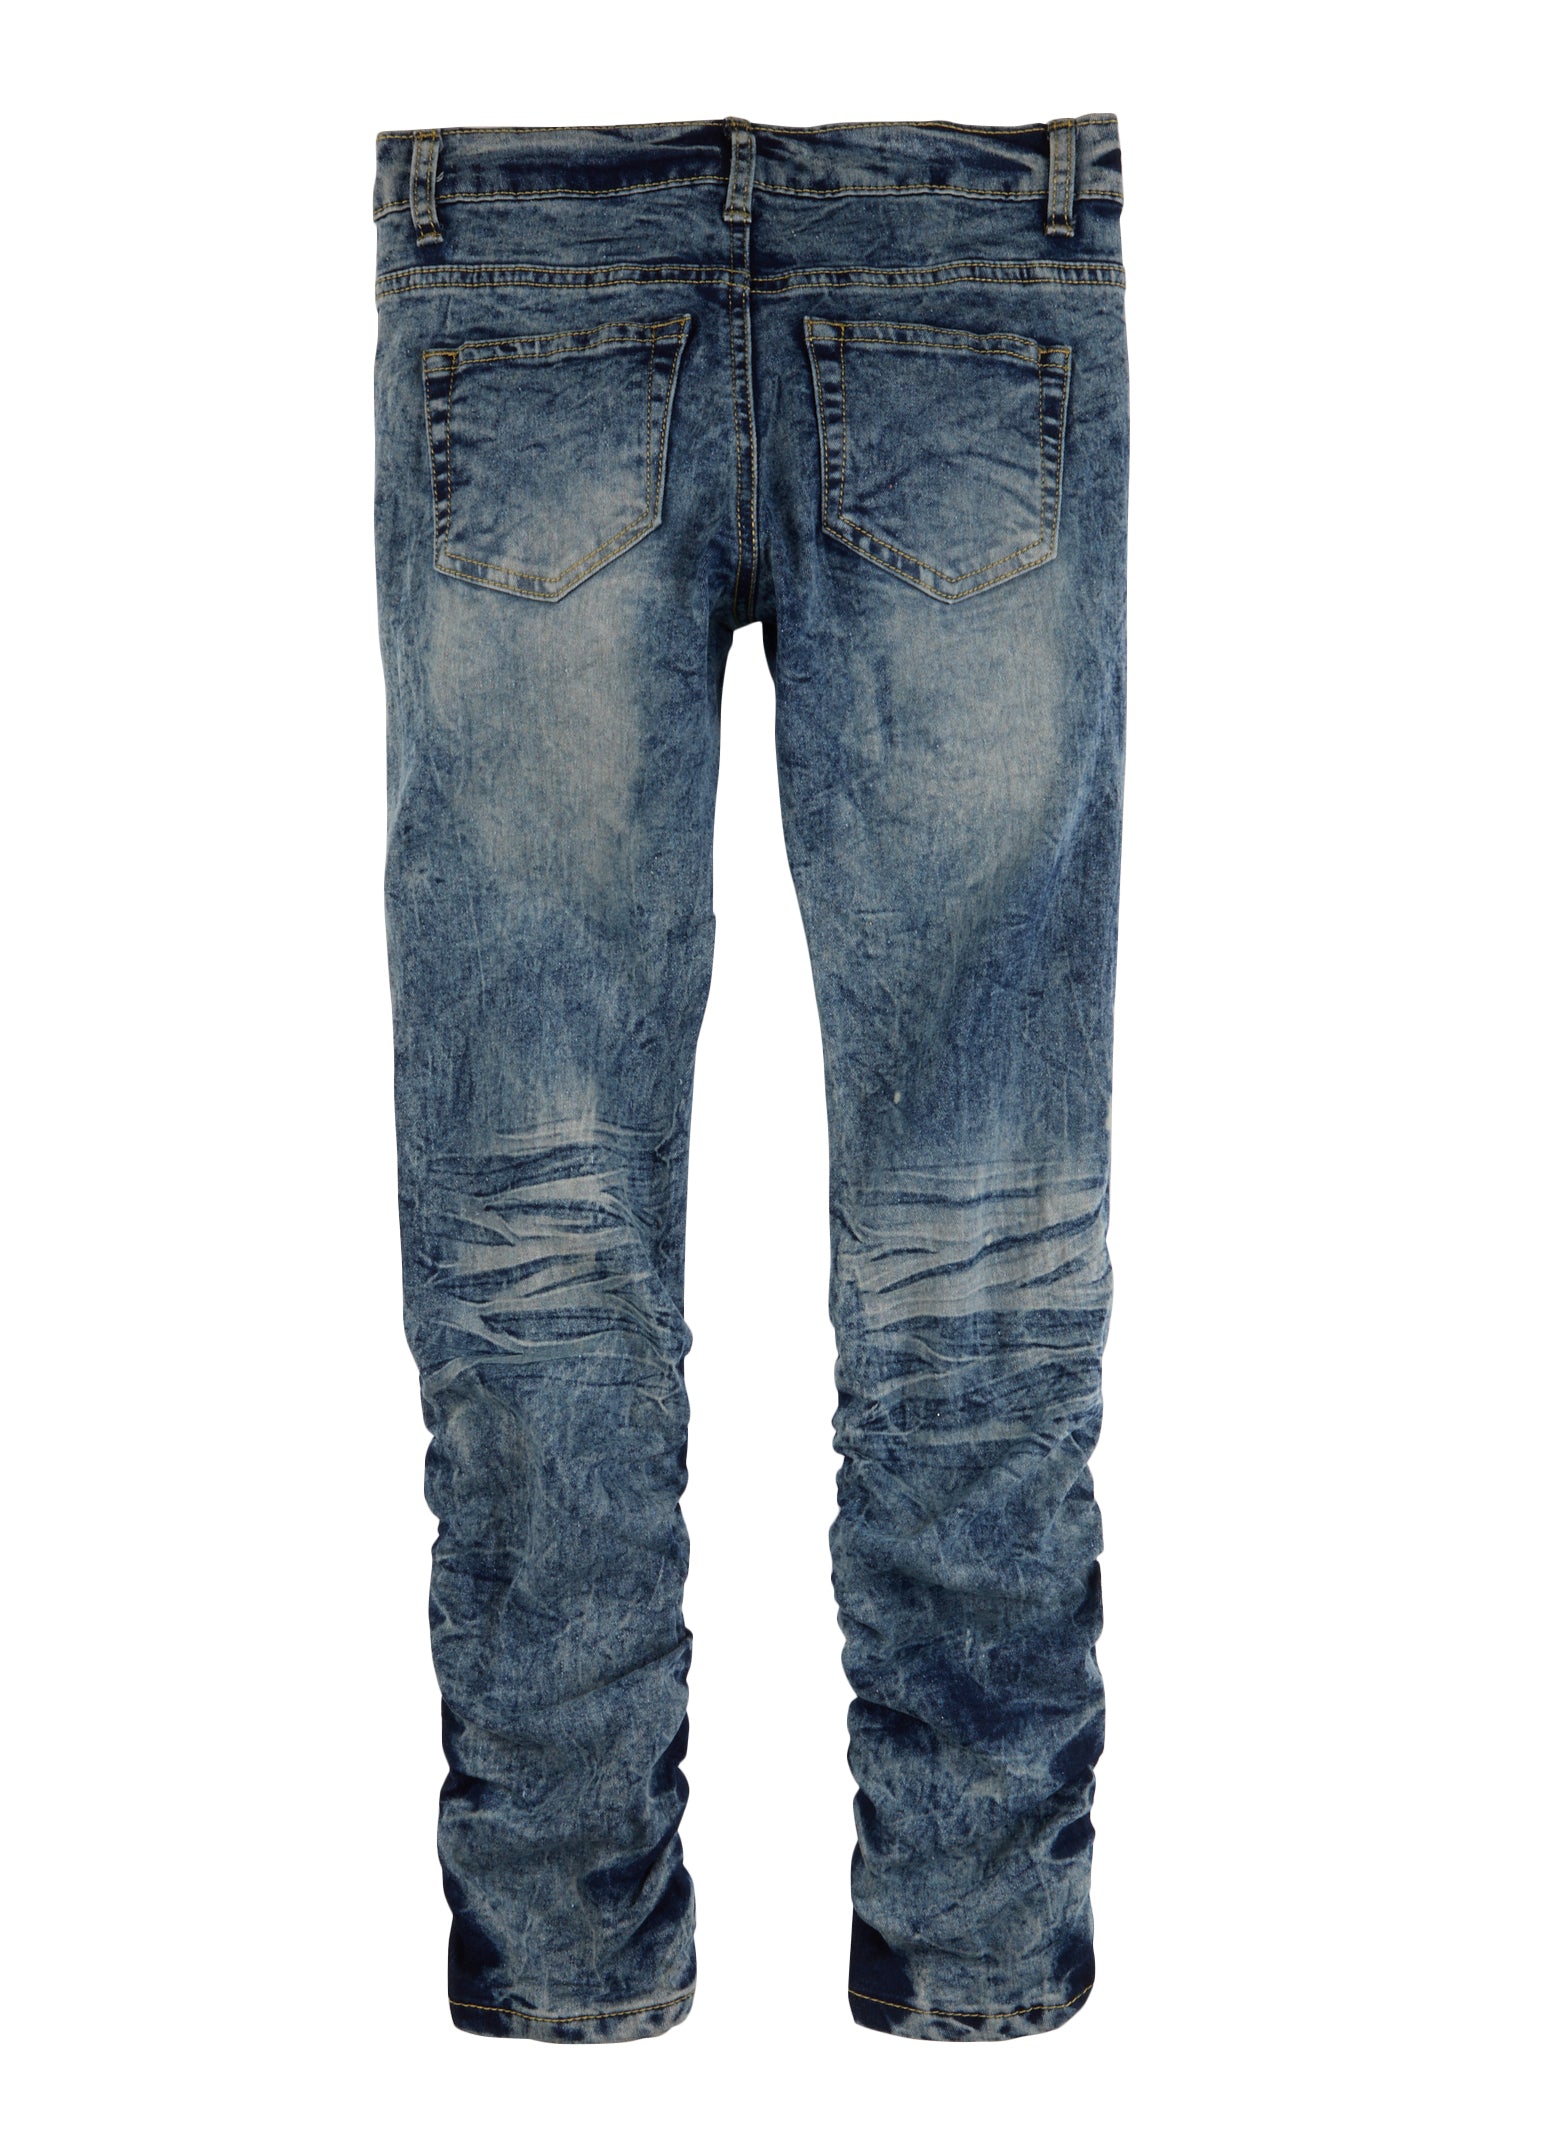 Girls Distressed Whiskered Acid Wash Stacked Jeans